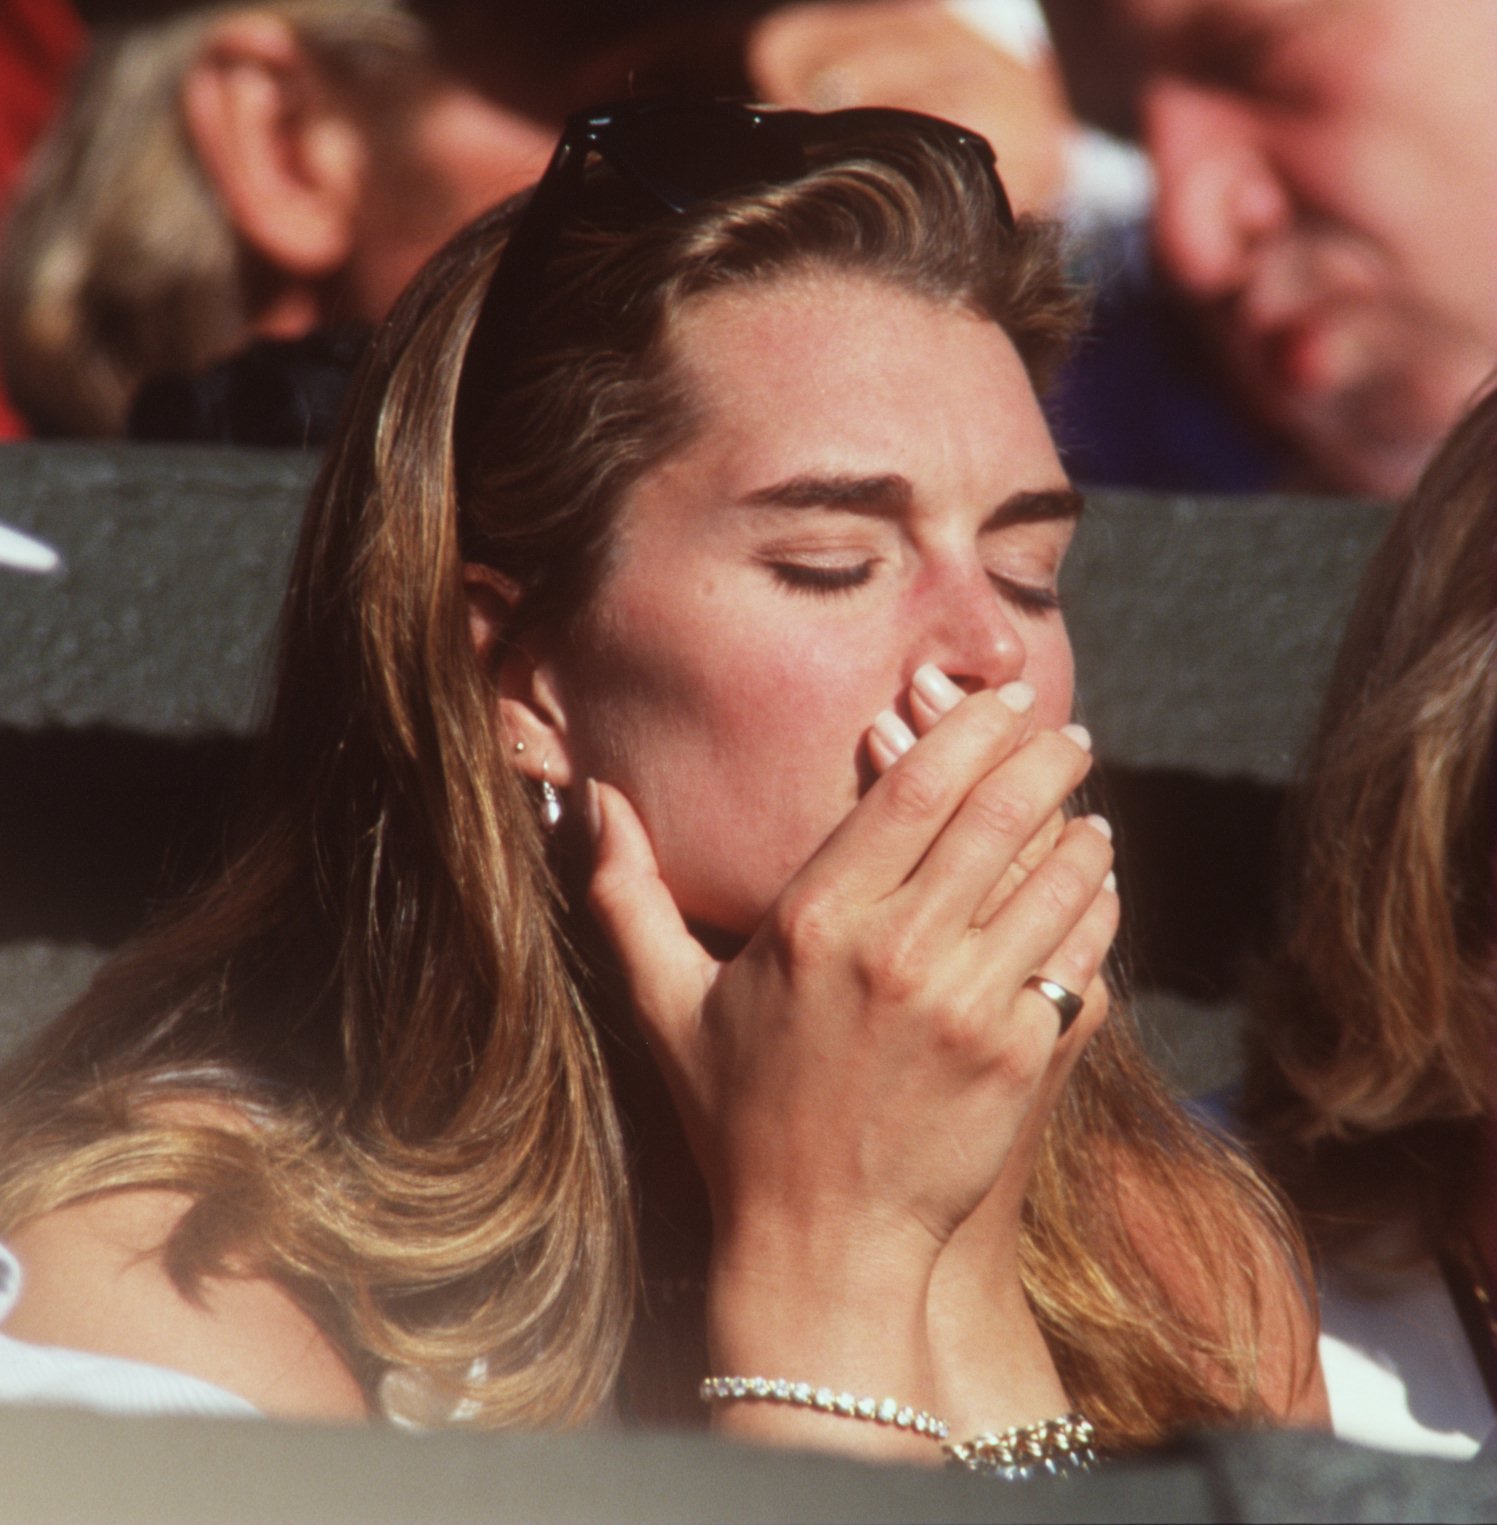 Brooke Shields looking dejected during the Wimbledon Tennis Championships where her boyfriend Andre Agassi lost his semi-final match to Boris Becker. / Source: Getty Images